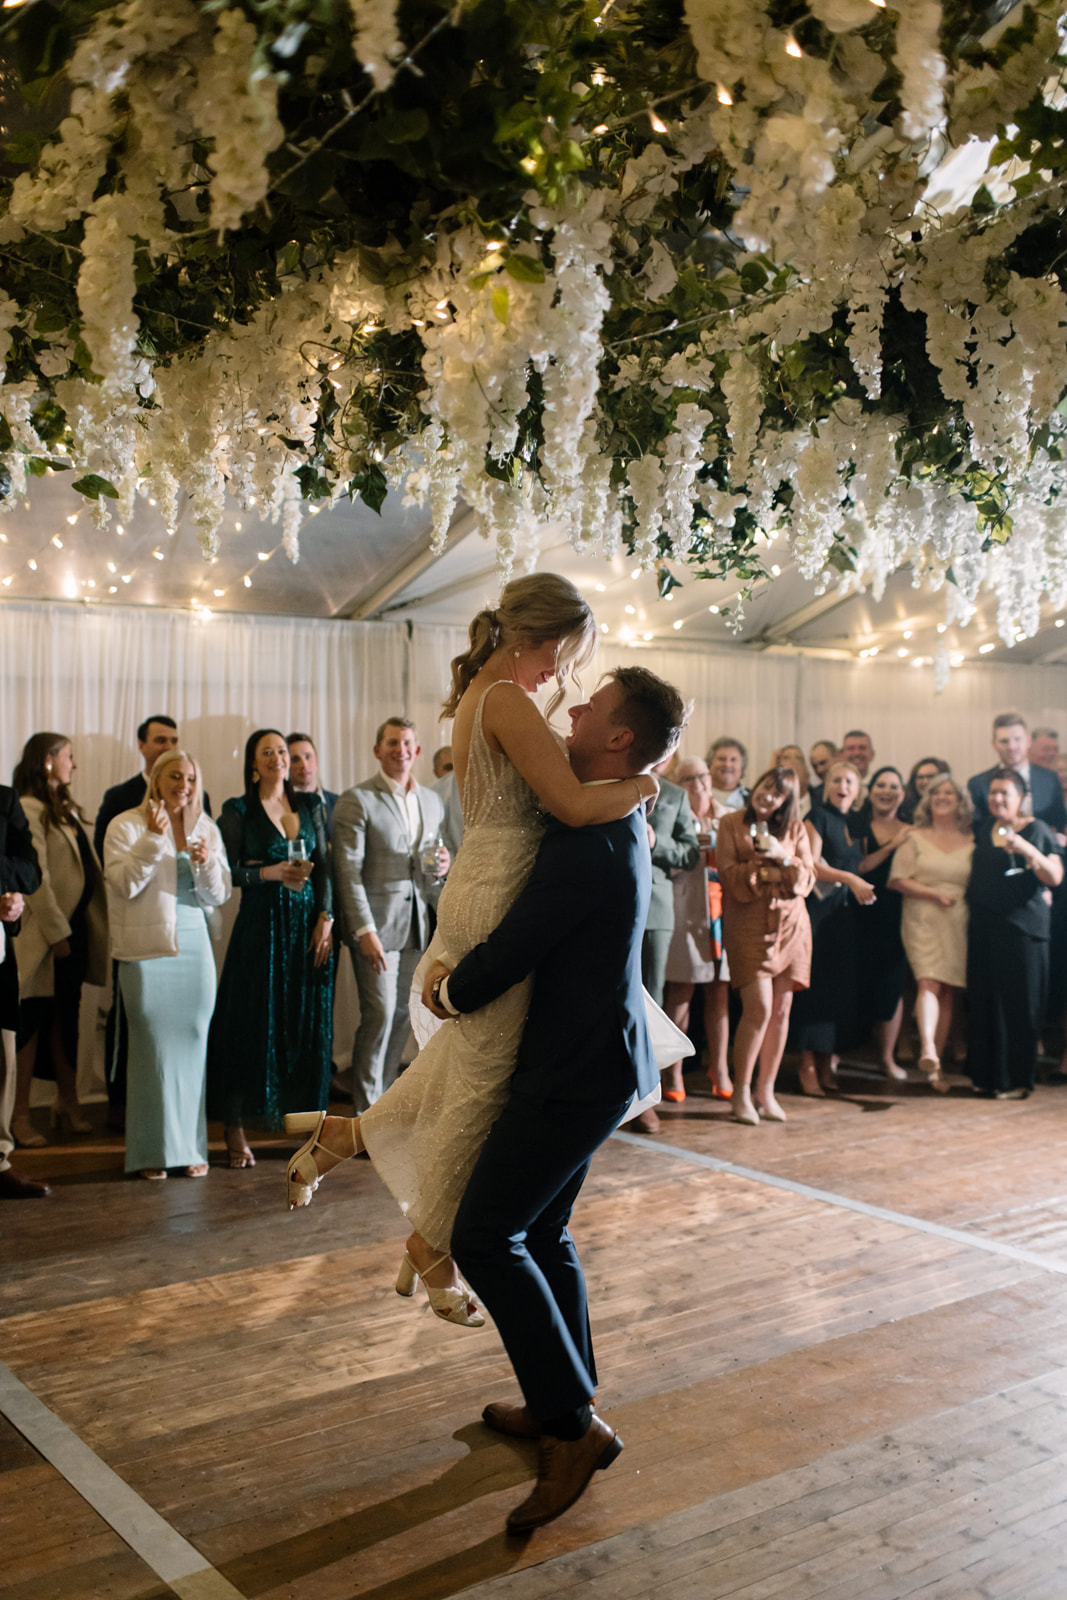 Bride and Groom's First Dance under Hocker Marquee on Integrated Dancefloor With Florals